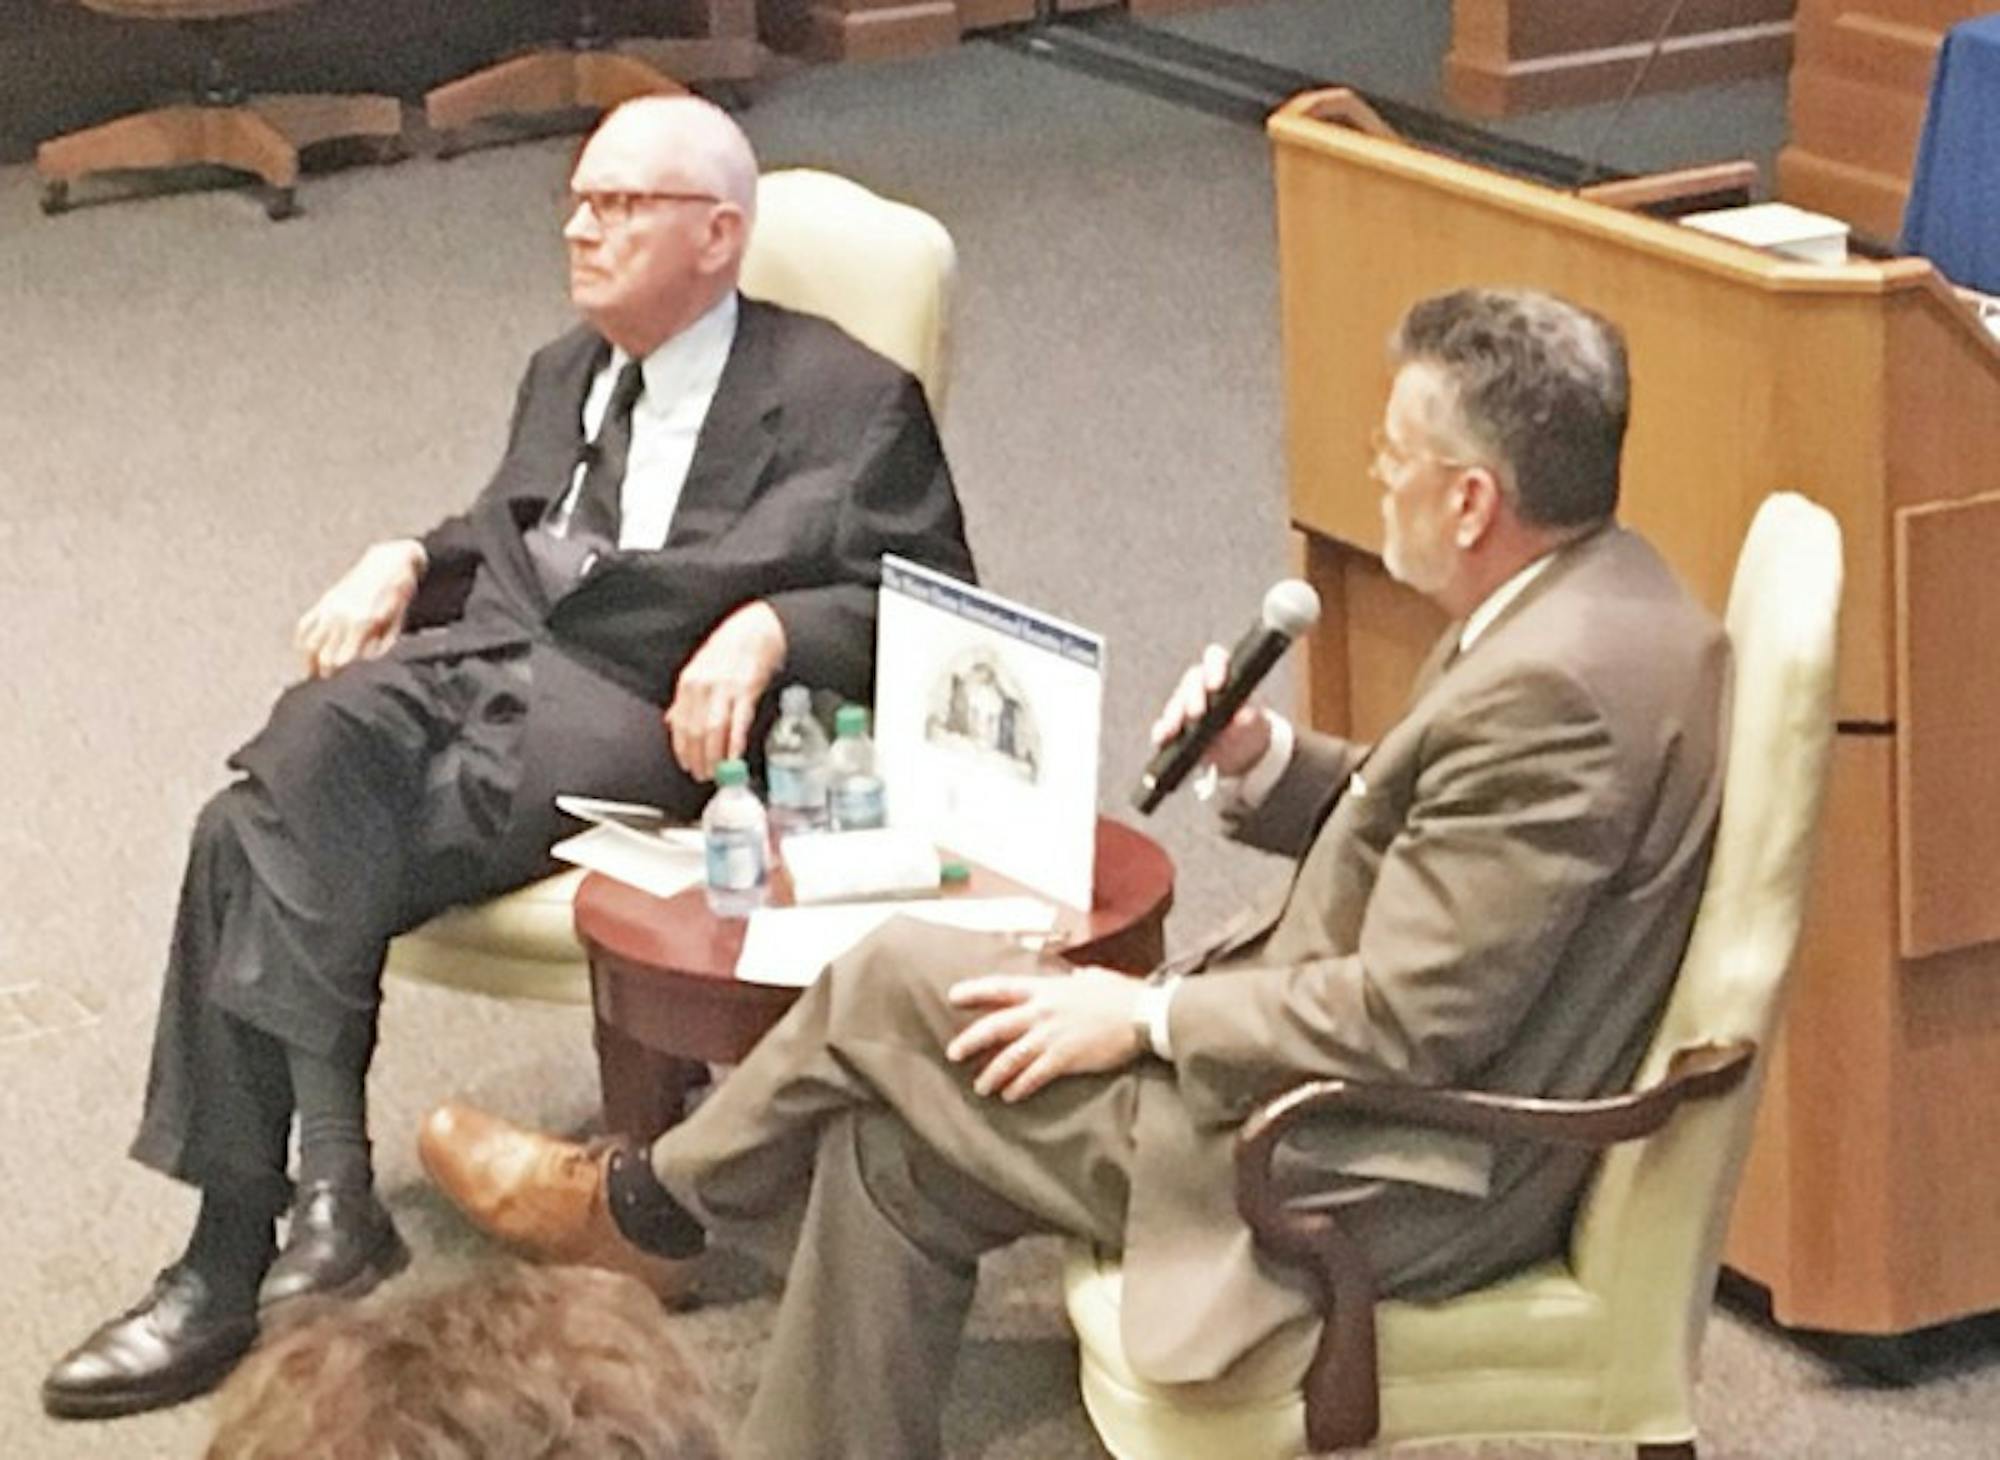 Former Congressman and vice-chair of the 9/11 Commission Lee Hamilton, left, reflected on issues such as terrorism threats and national security with political science professor Michael Desch, right, on Thursday.